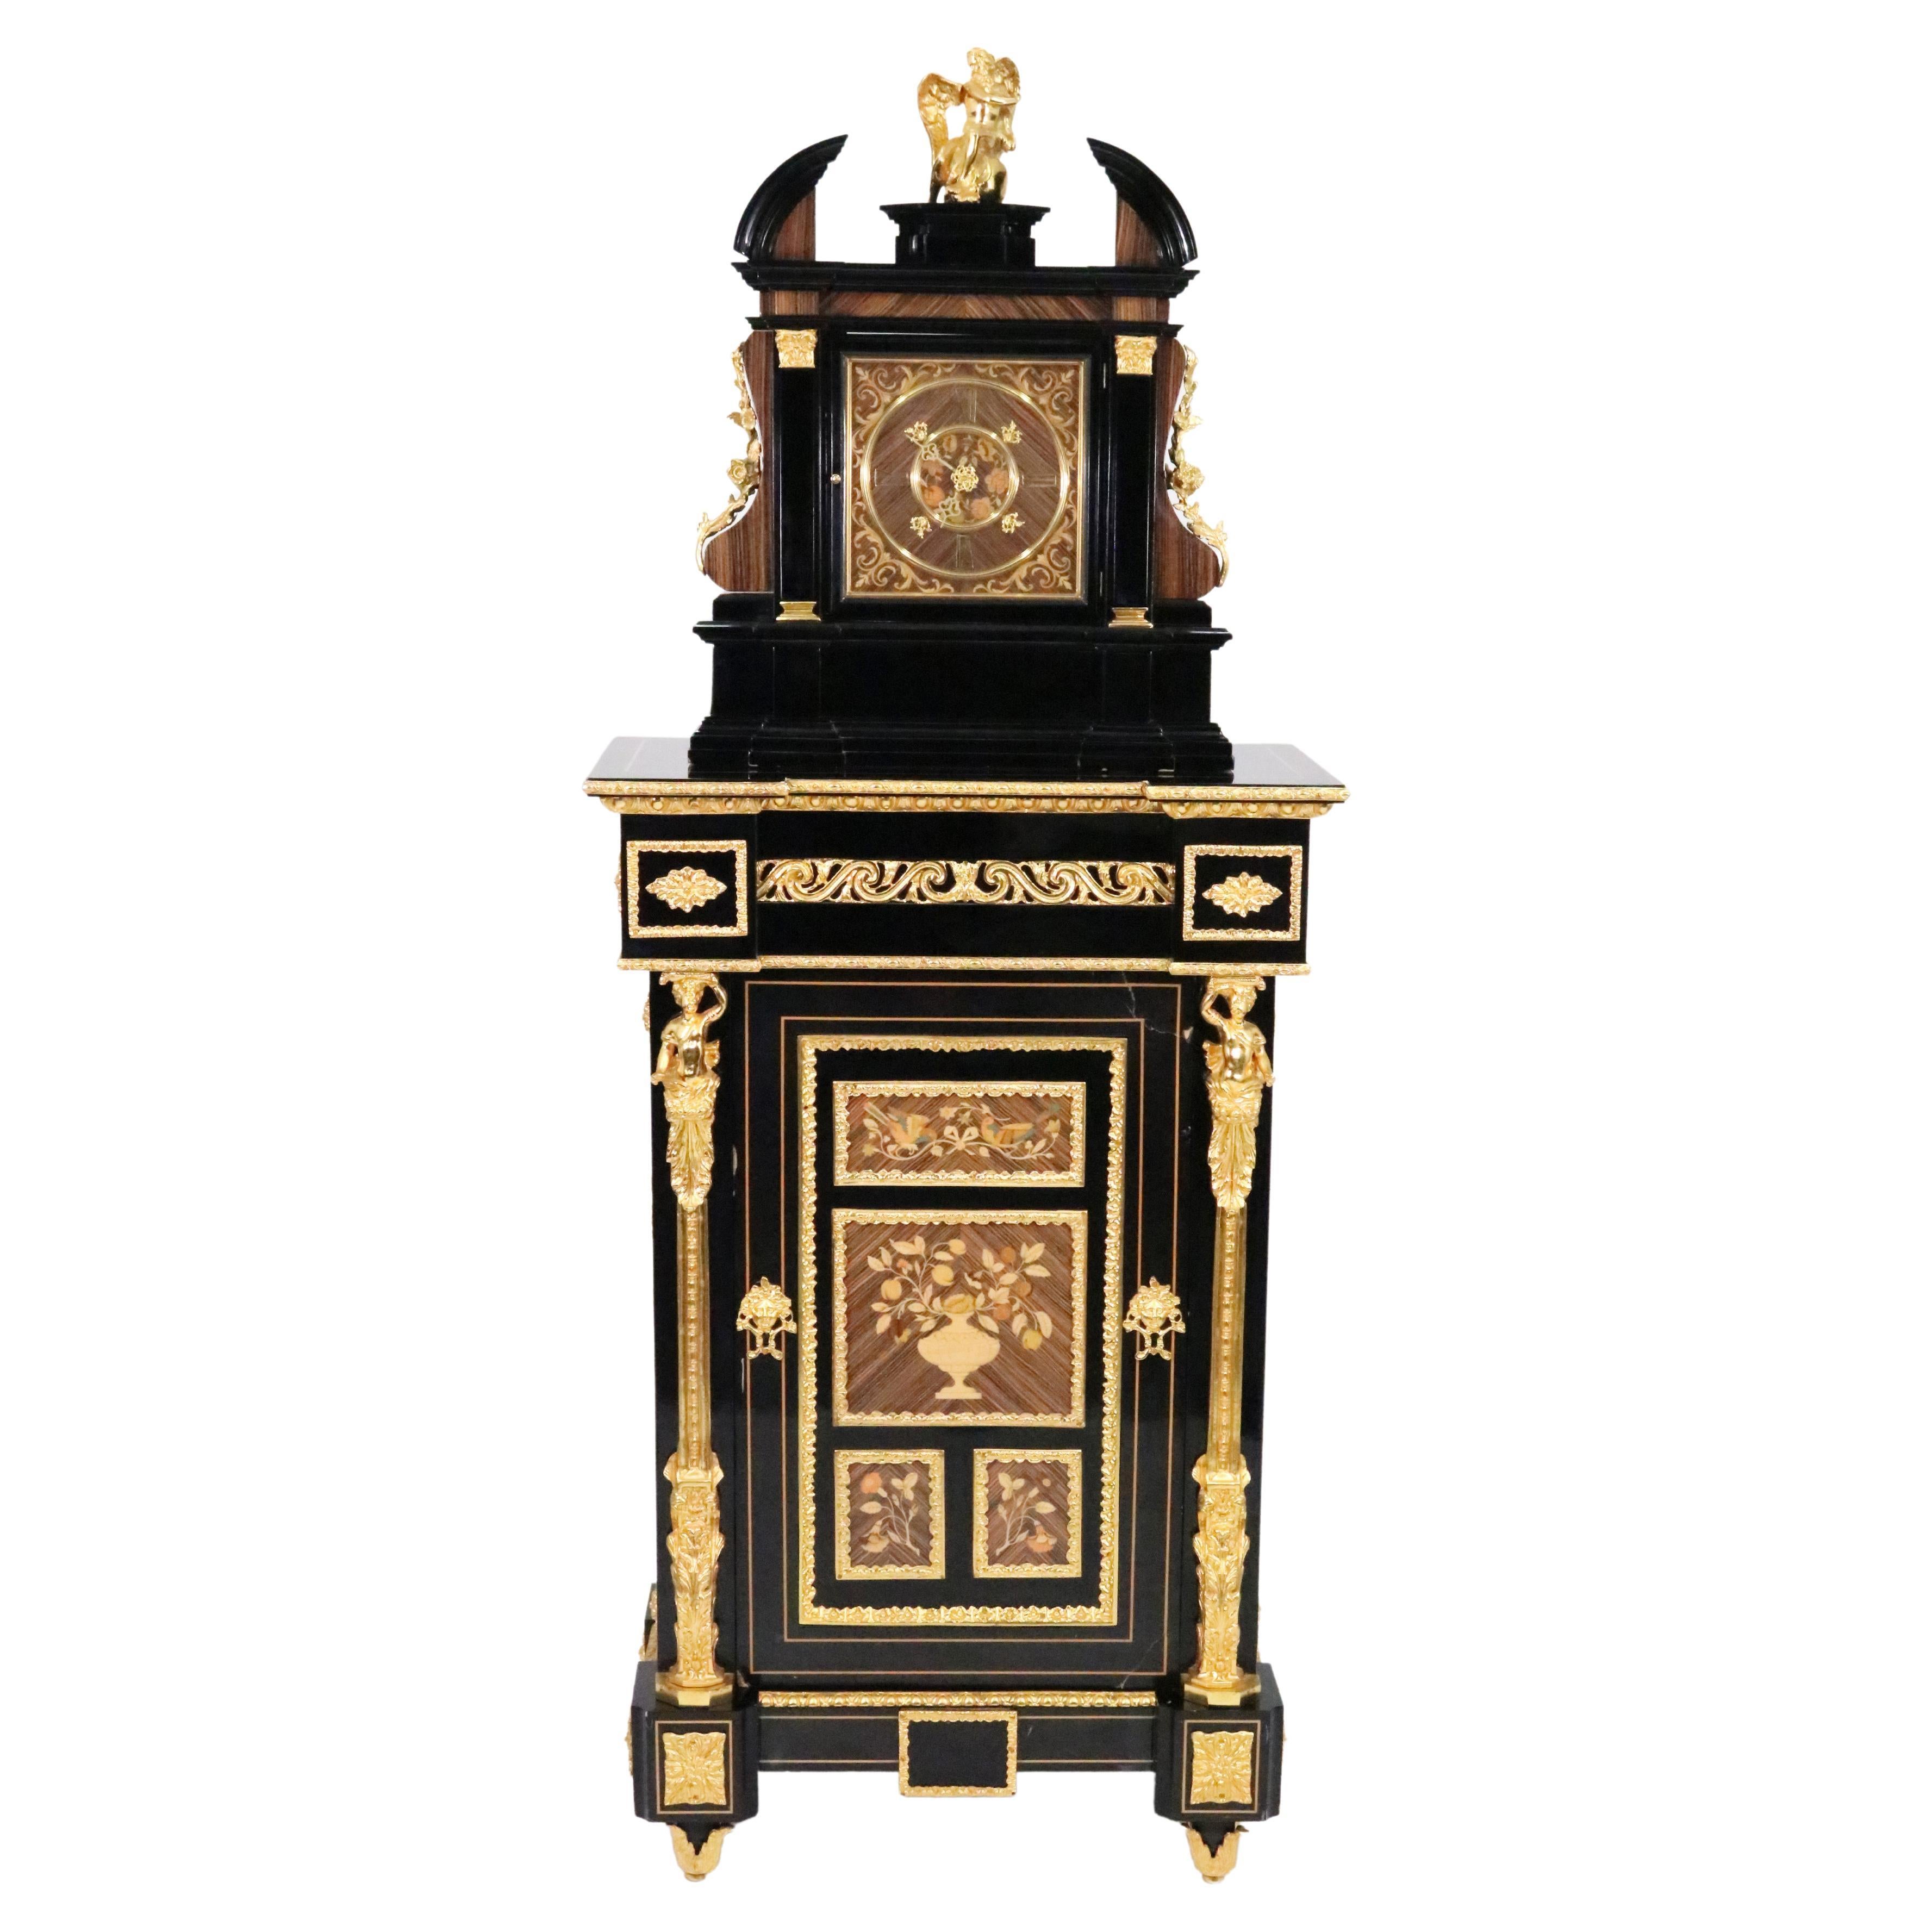 How can I tell if a grandfather clock is real?